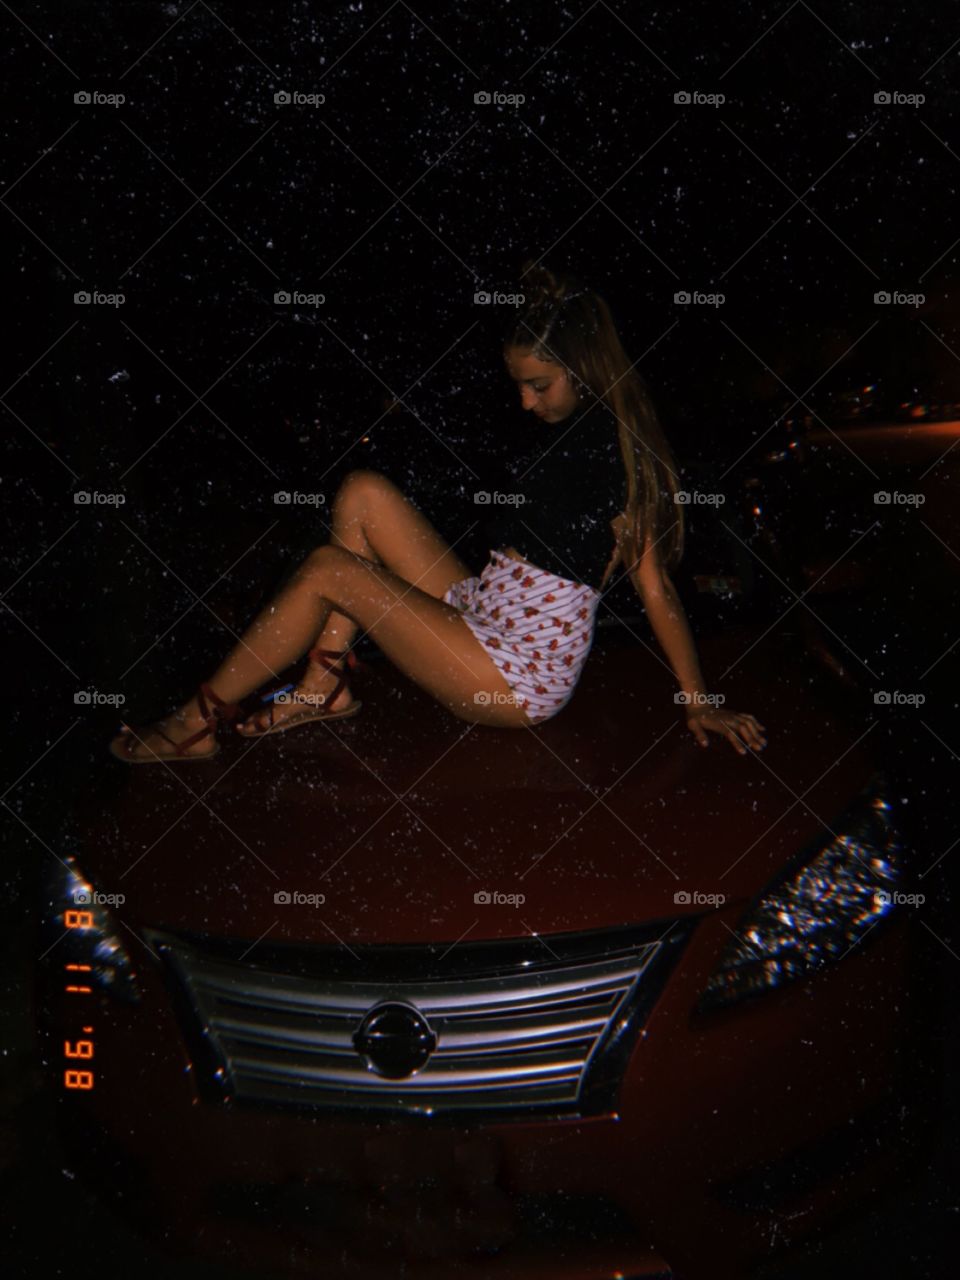 Female sitting on hood of red car at night